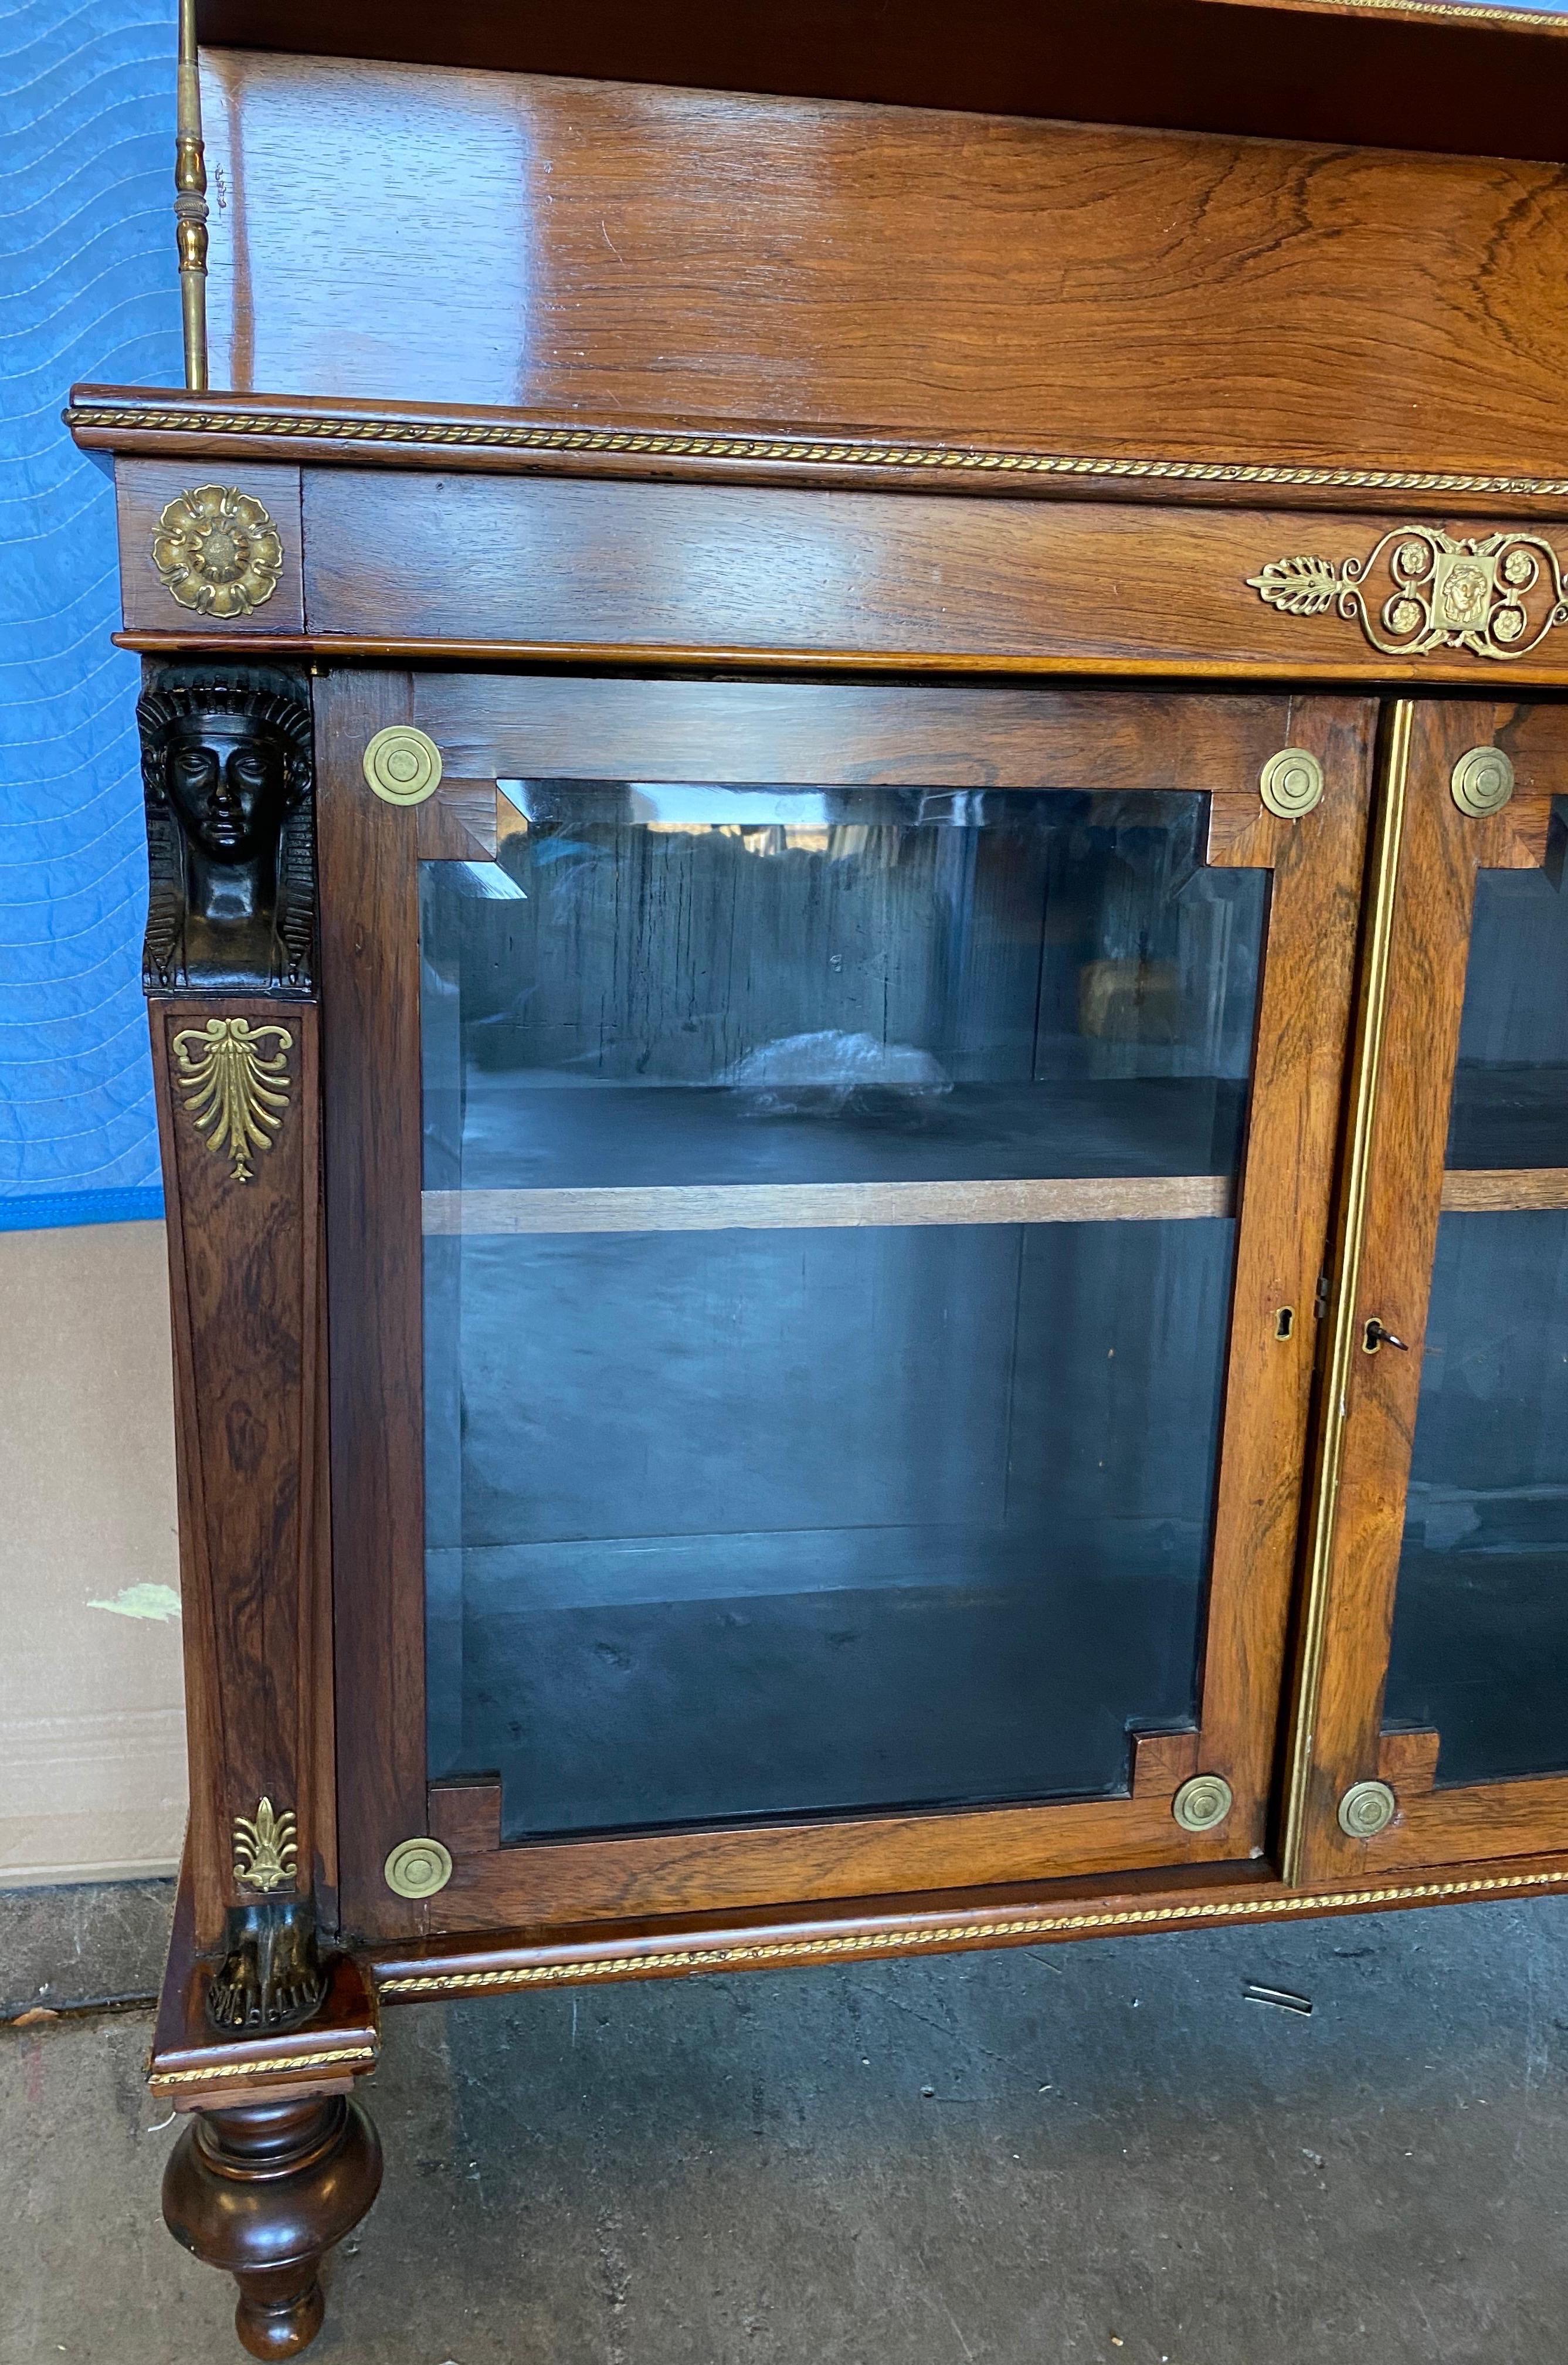 Fine 19th century English Regency bronze mounted rosewood chiffonier. Great quality bronze mounts and caryatids forming the stiles. Beveled glass doors and handsome turned feet.